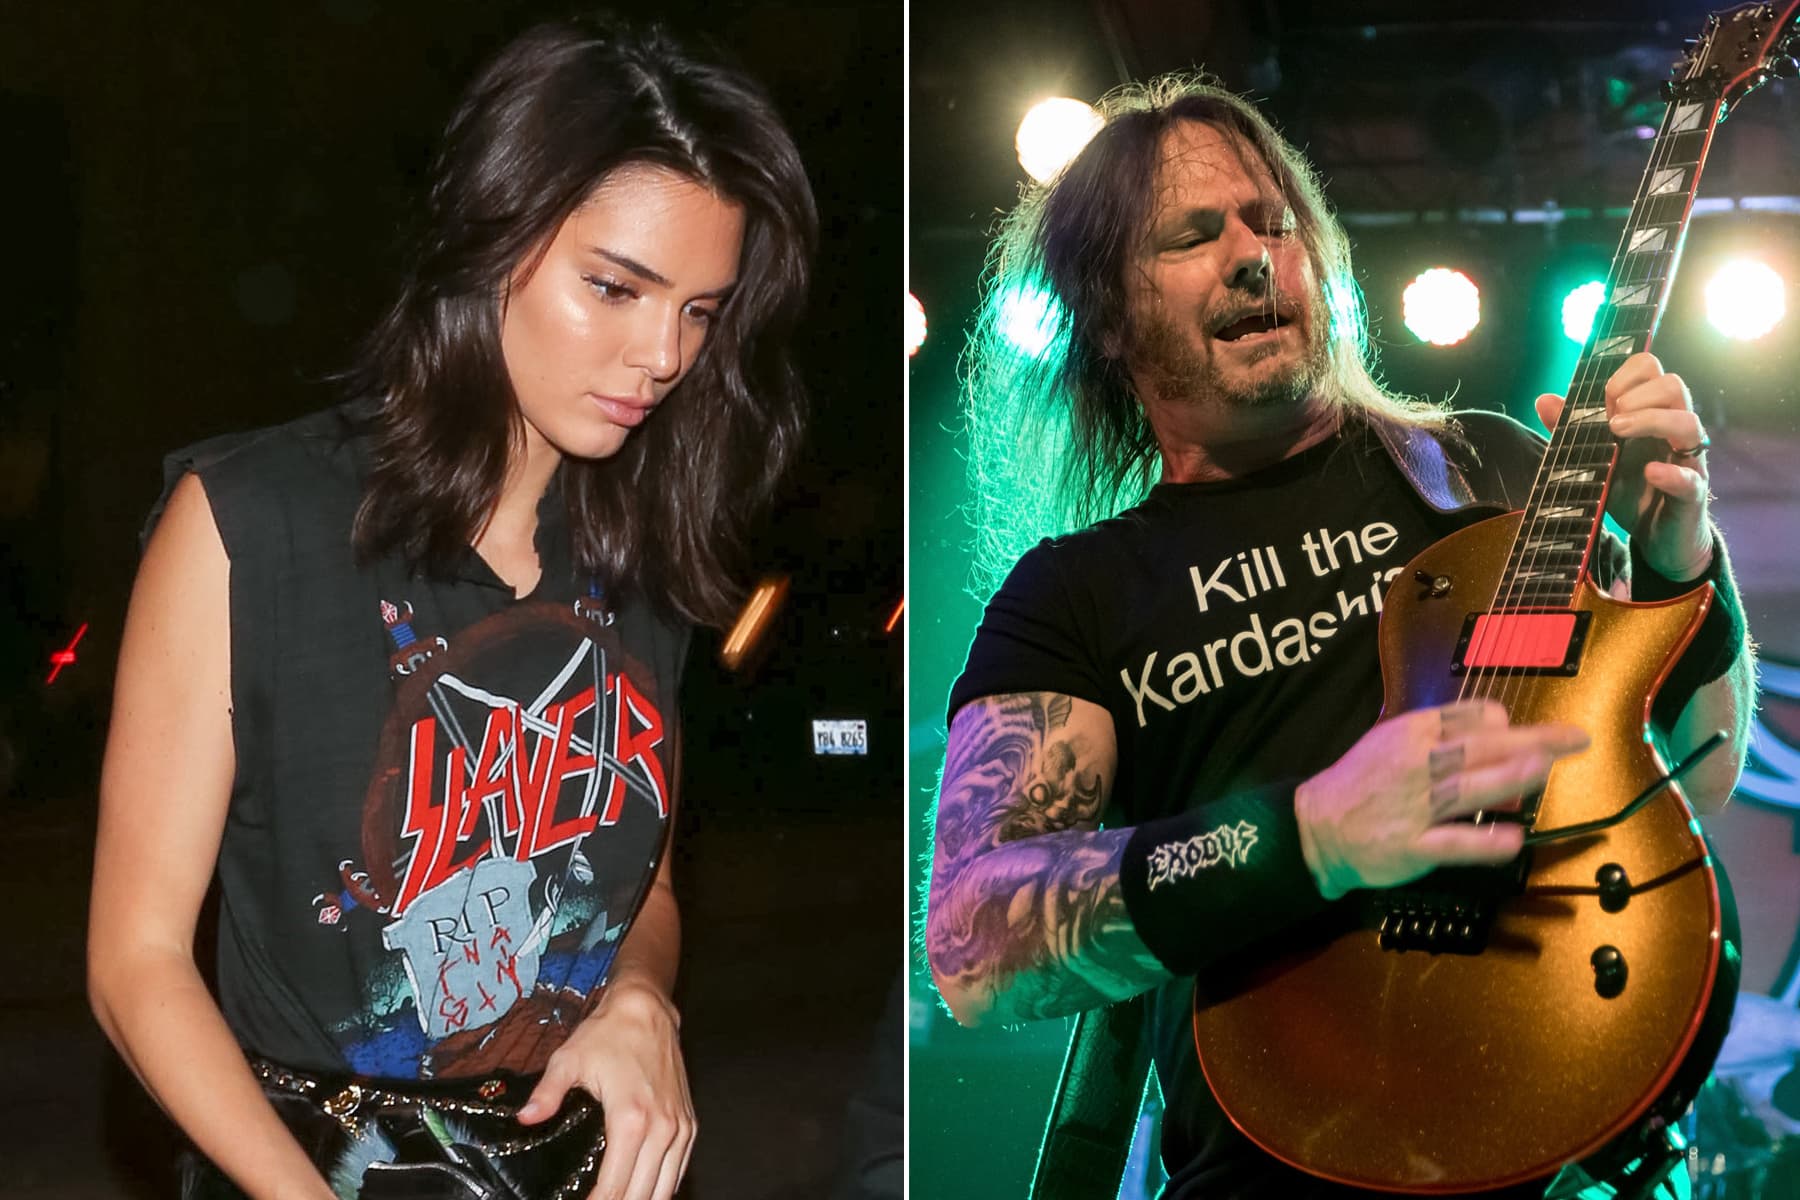 Slayer made $10 million on merchandise and it's not because of Kendall  Jenner